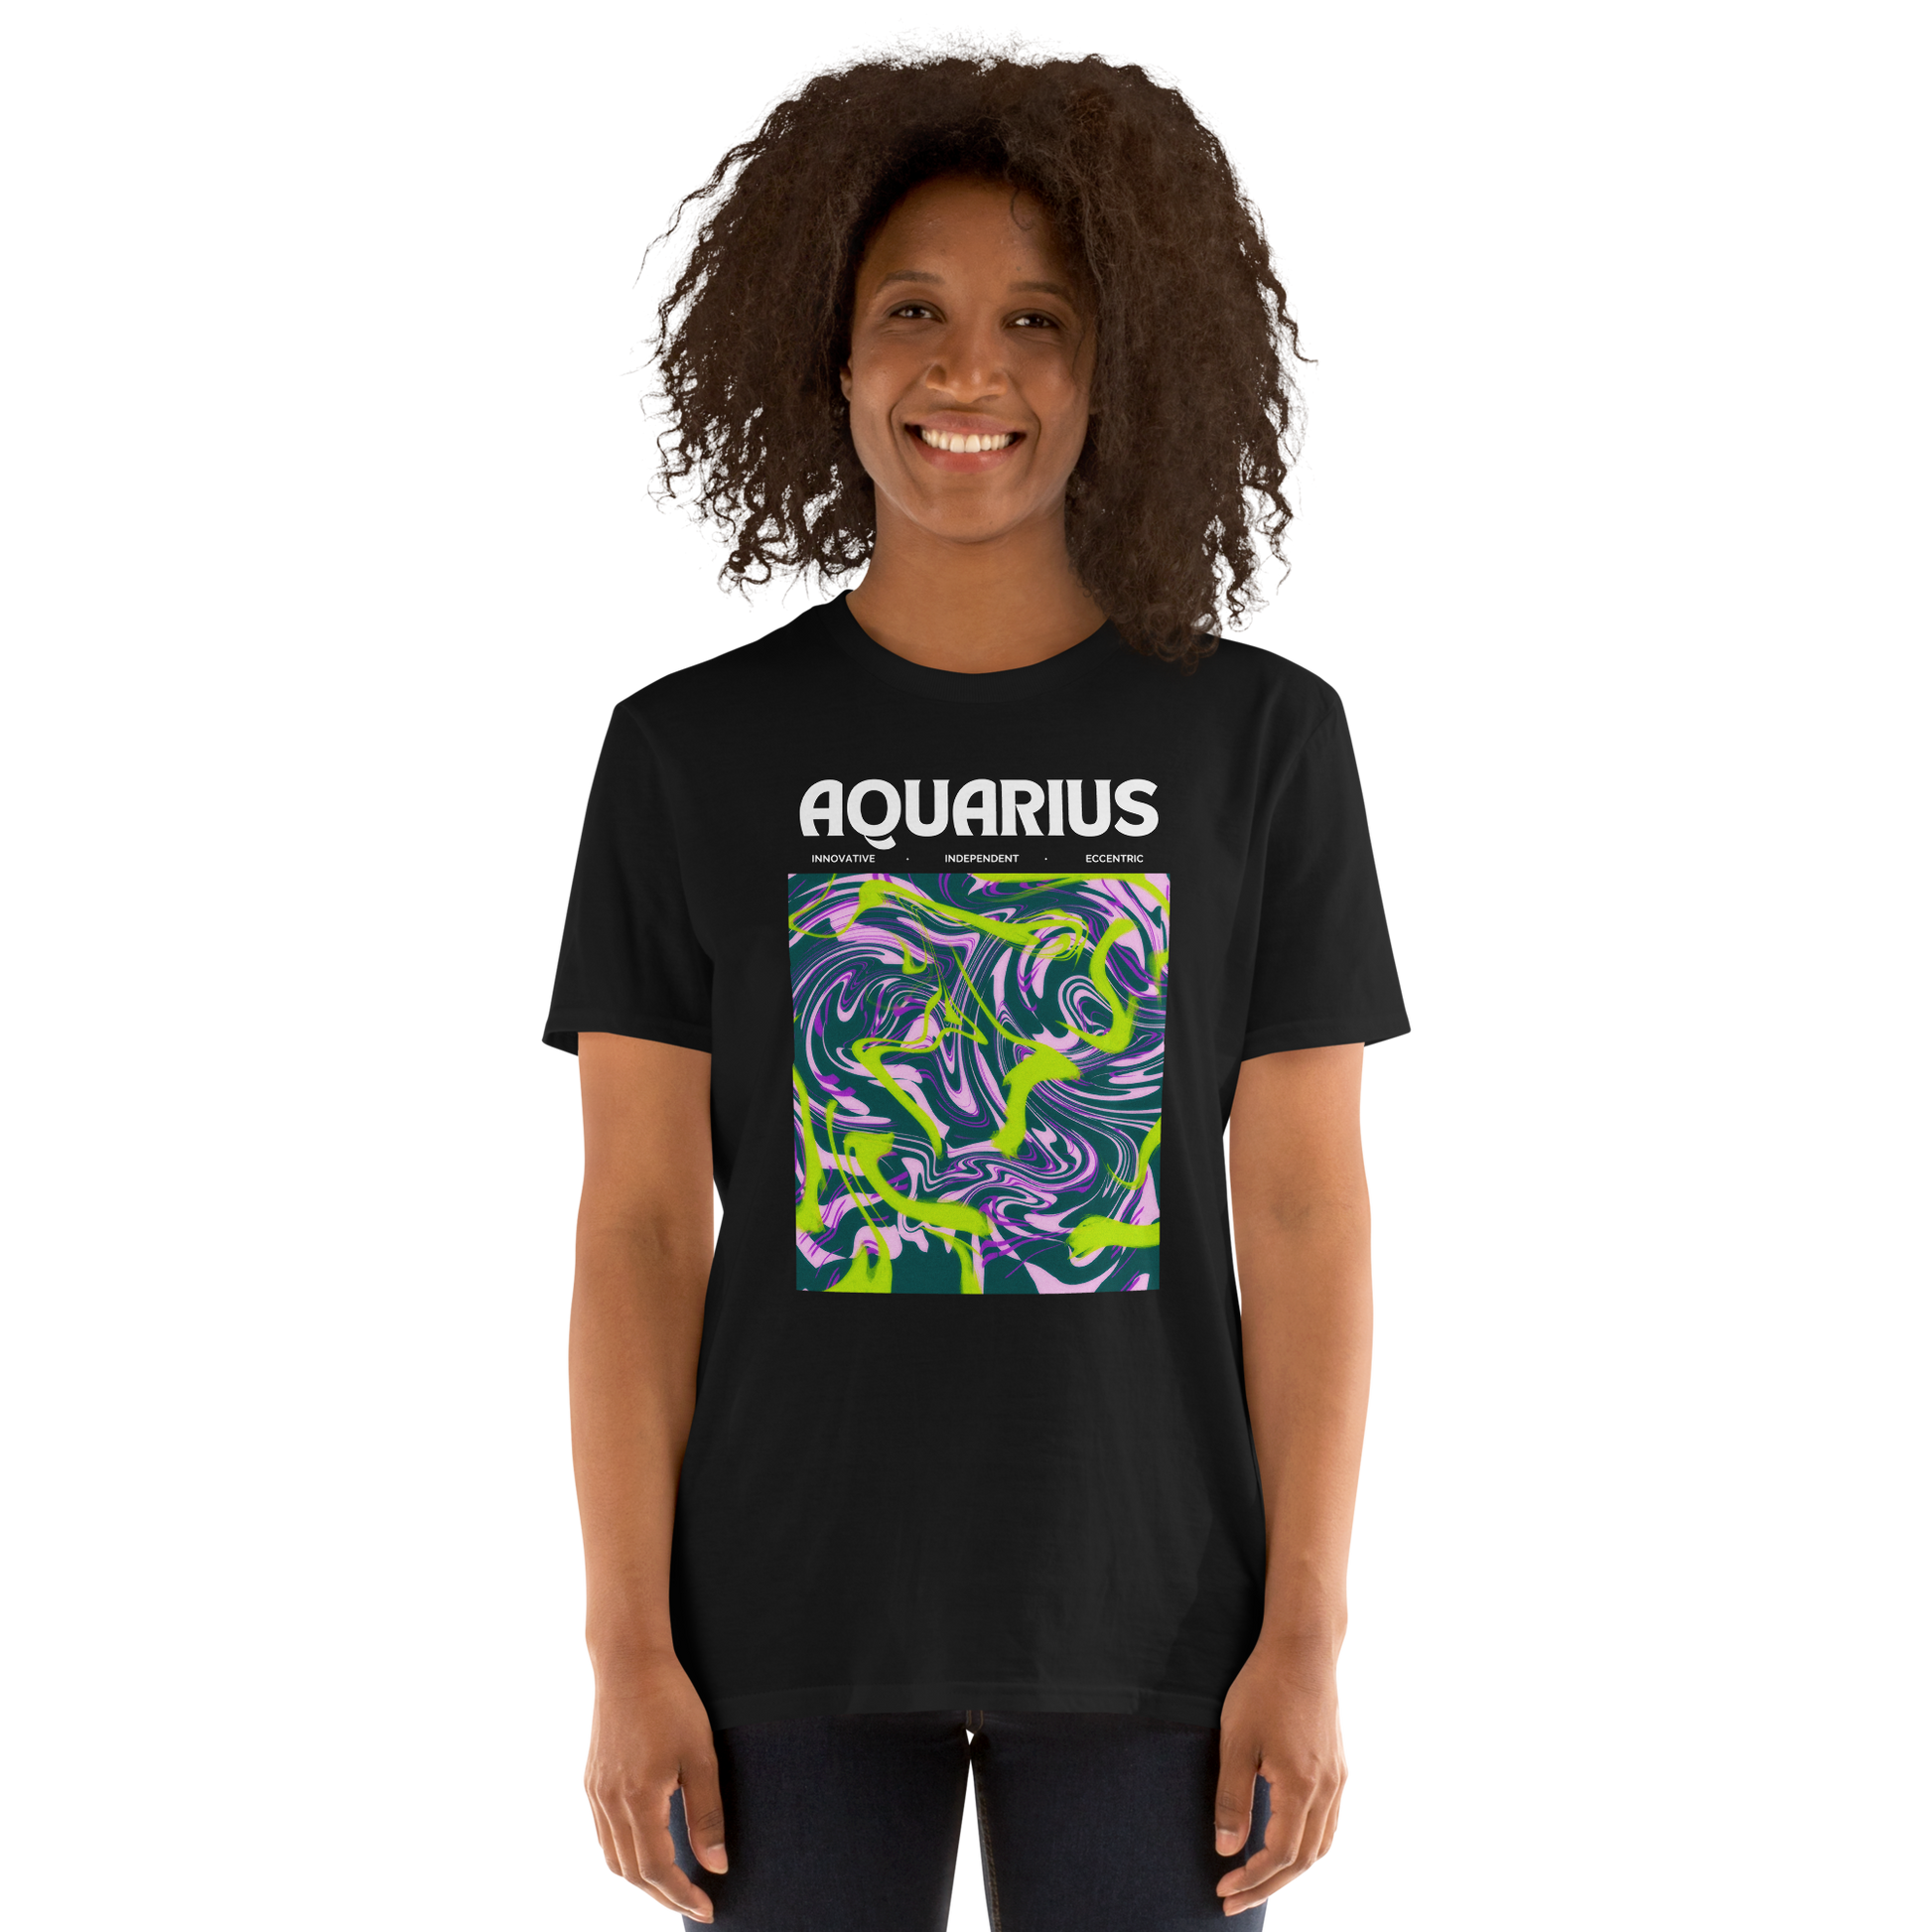 Smiling woman wearing a Black Aquarius T-Shirt featuring an Abstract Aquarius Star Sign graphic on the chest - Cool Graphic Zodiac T-Shirts - Boozy Fox